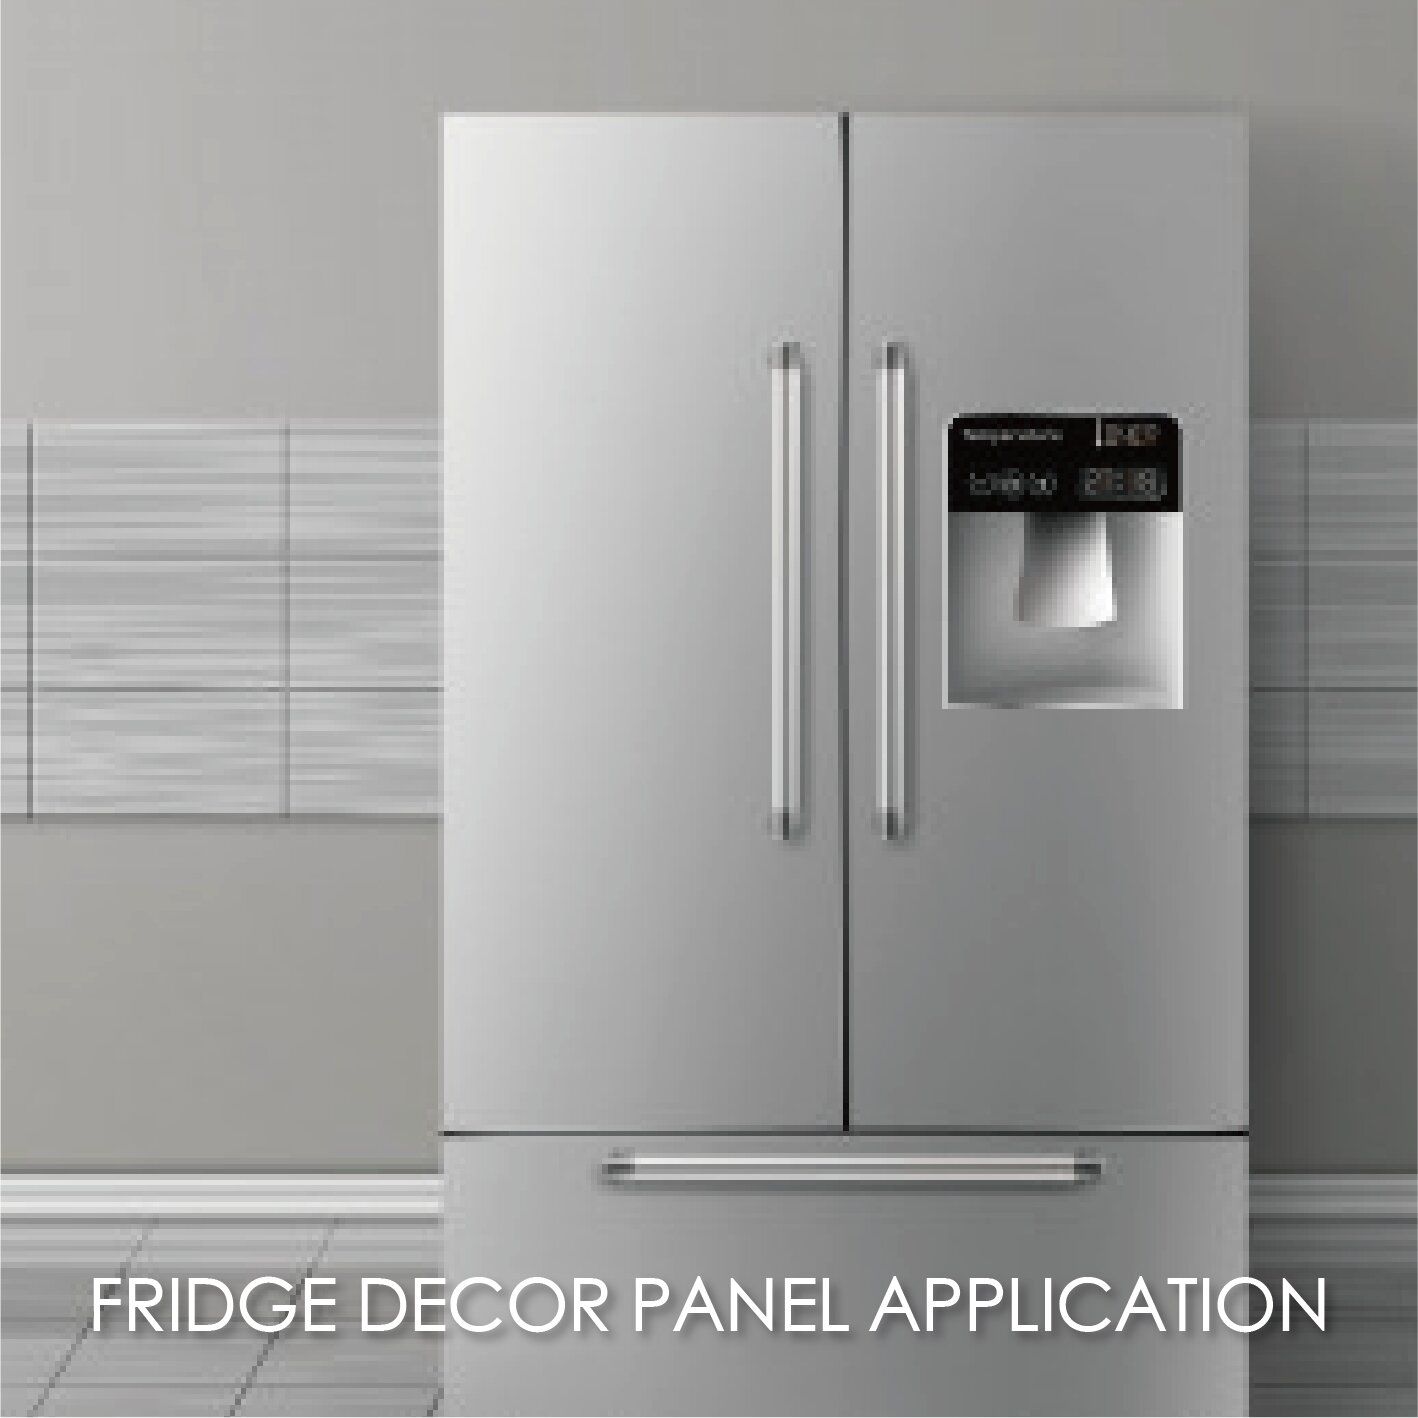 Find a proper solution for your refrigerator